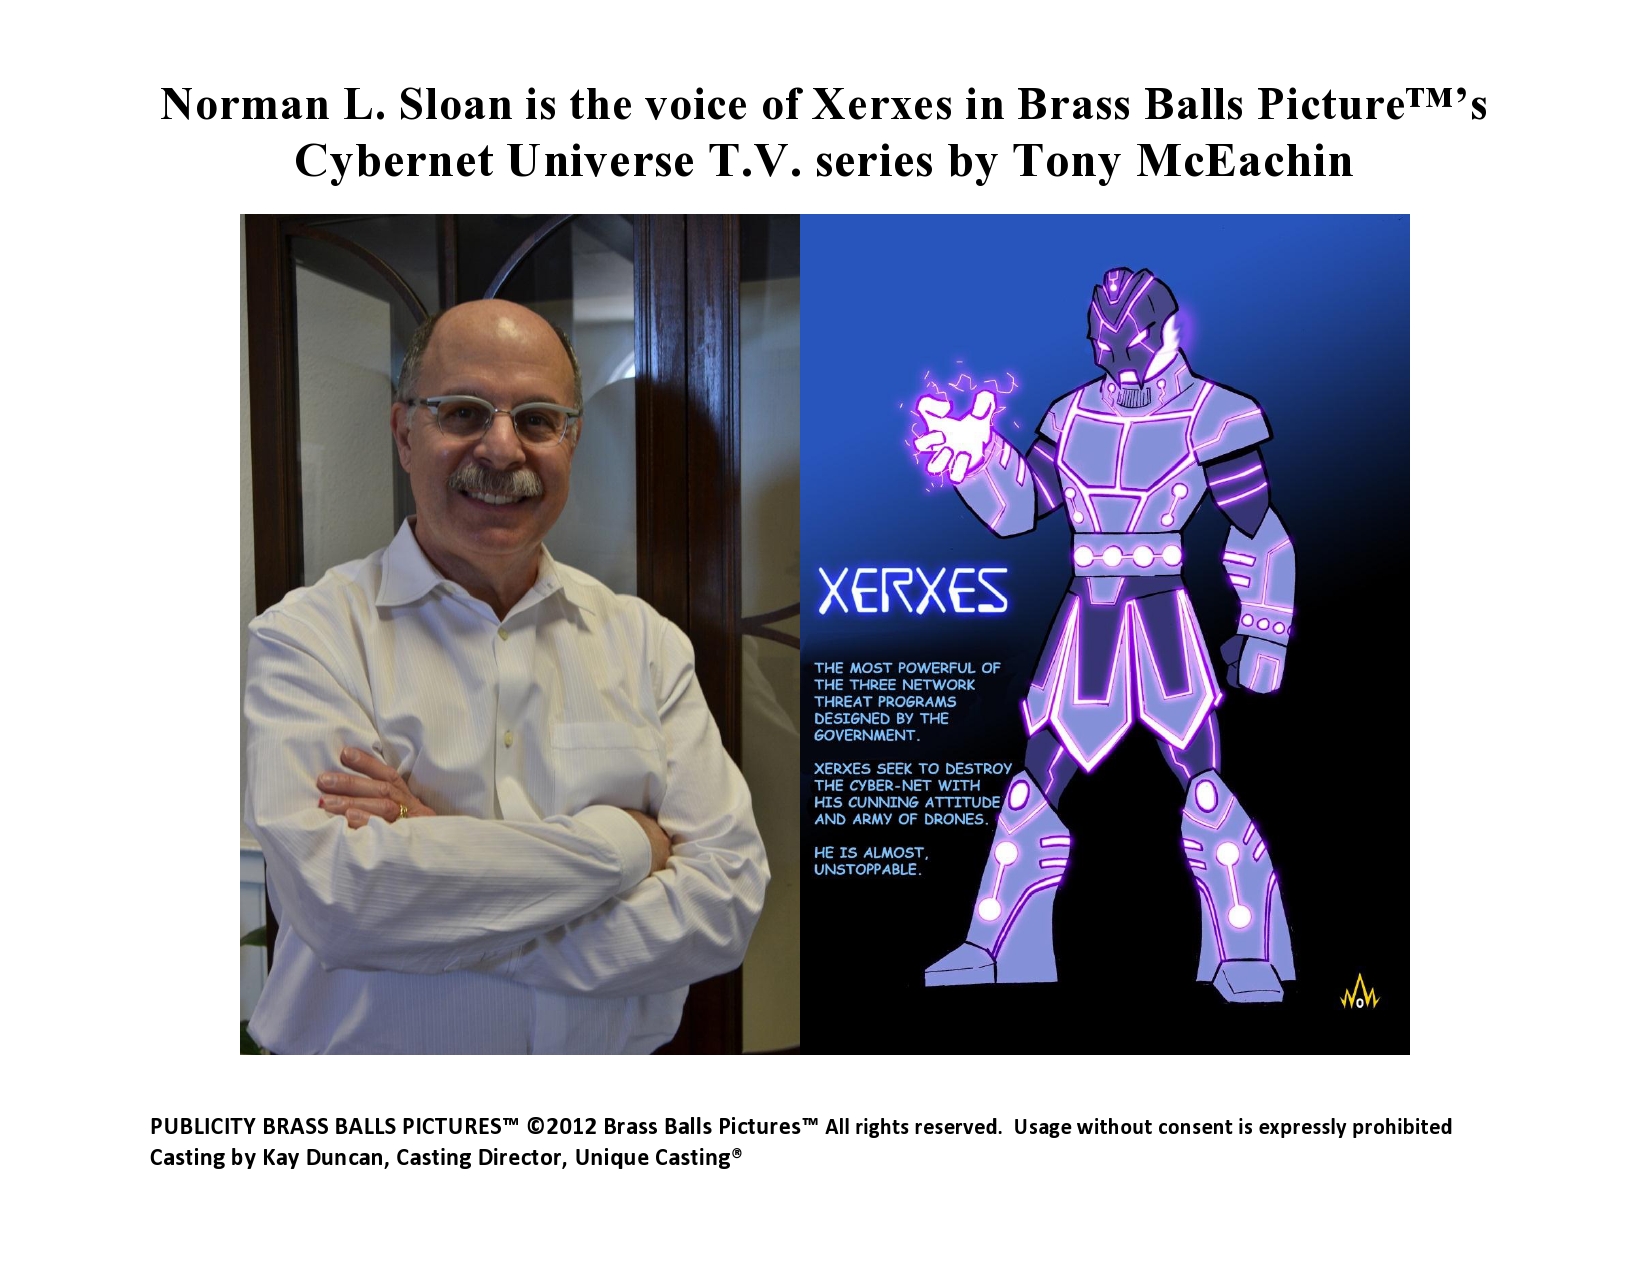 Unique Casting®'s Norman L. Sloan as voice of Xerxes in Brass Balls Pictures TV series by Tony McEachin